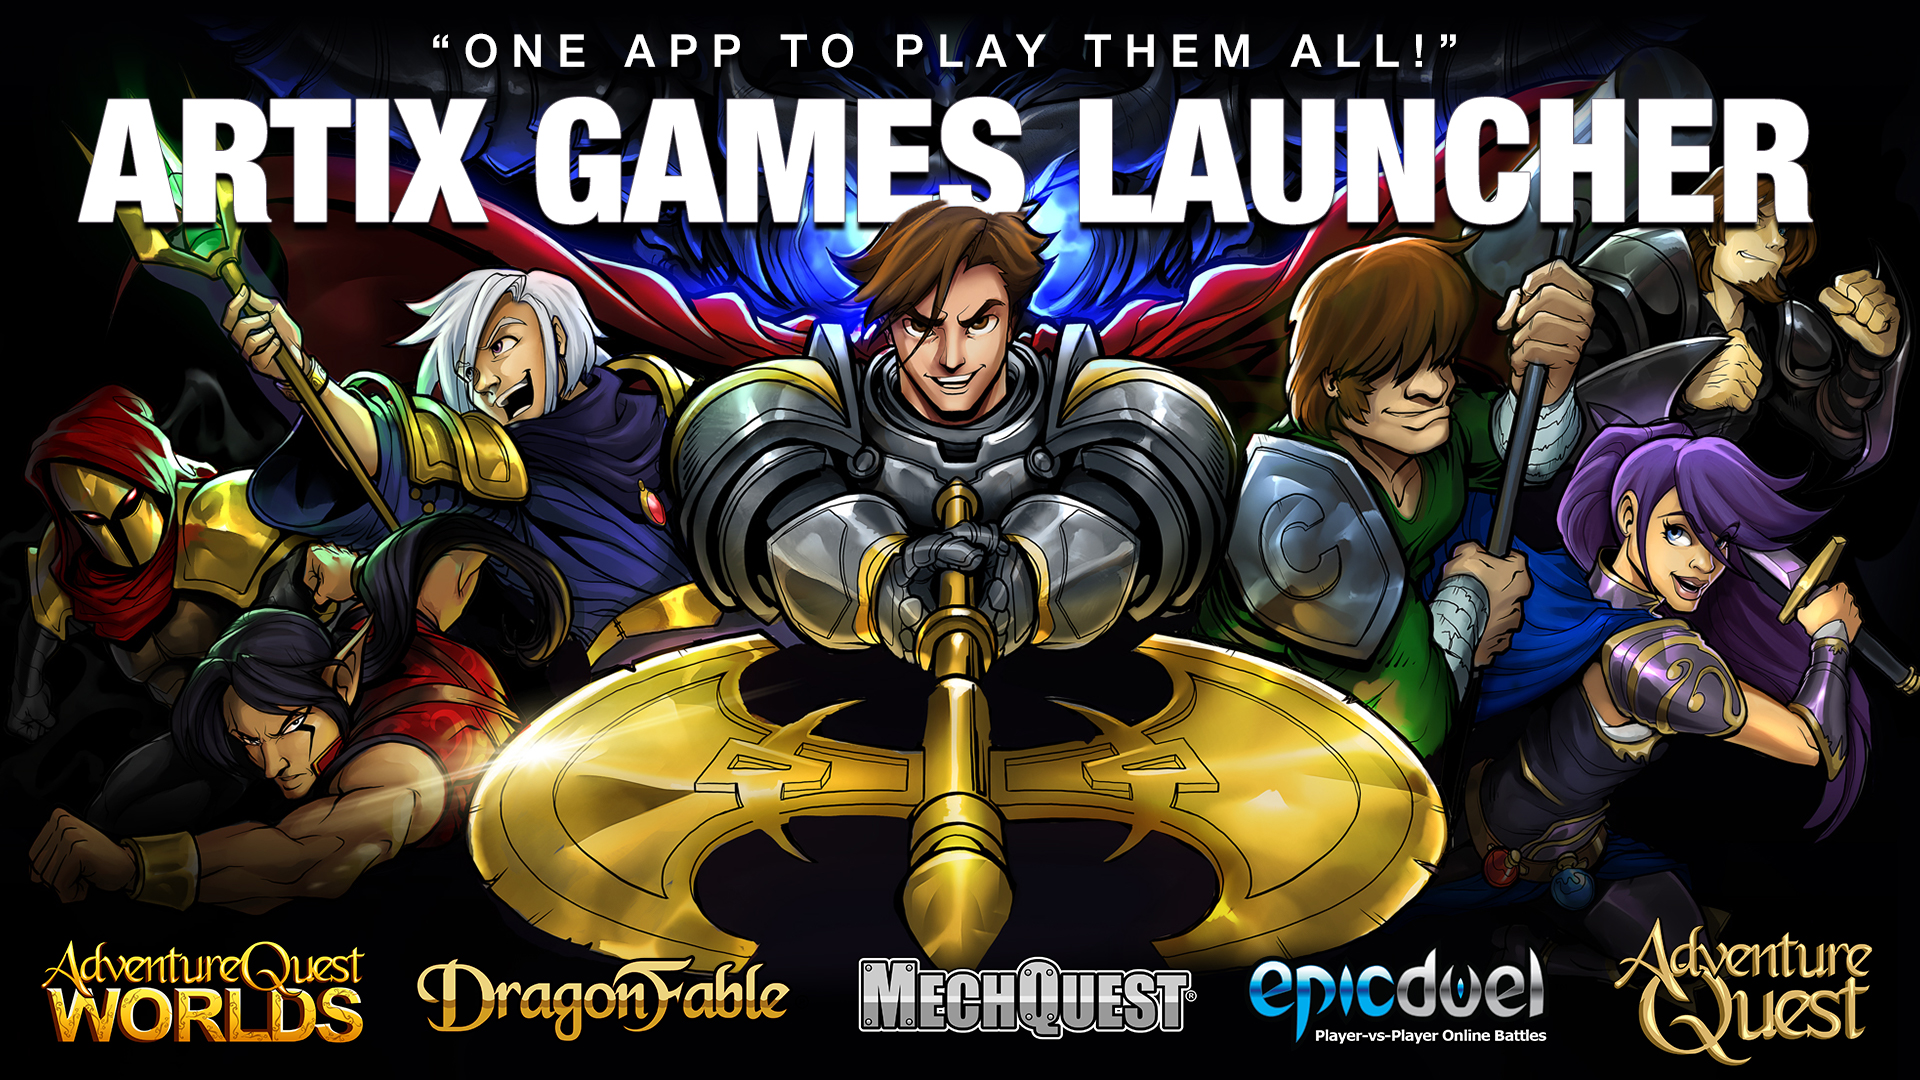 Play using the Artix Games Launcher